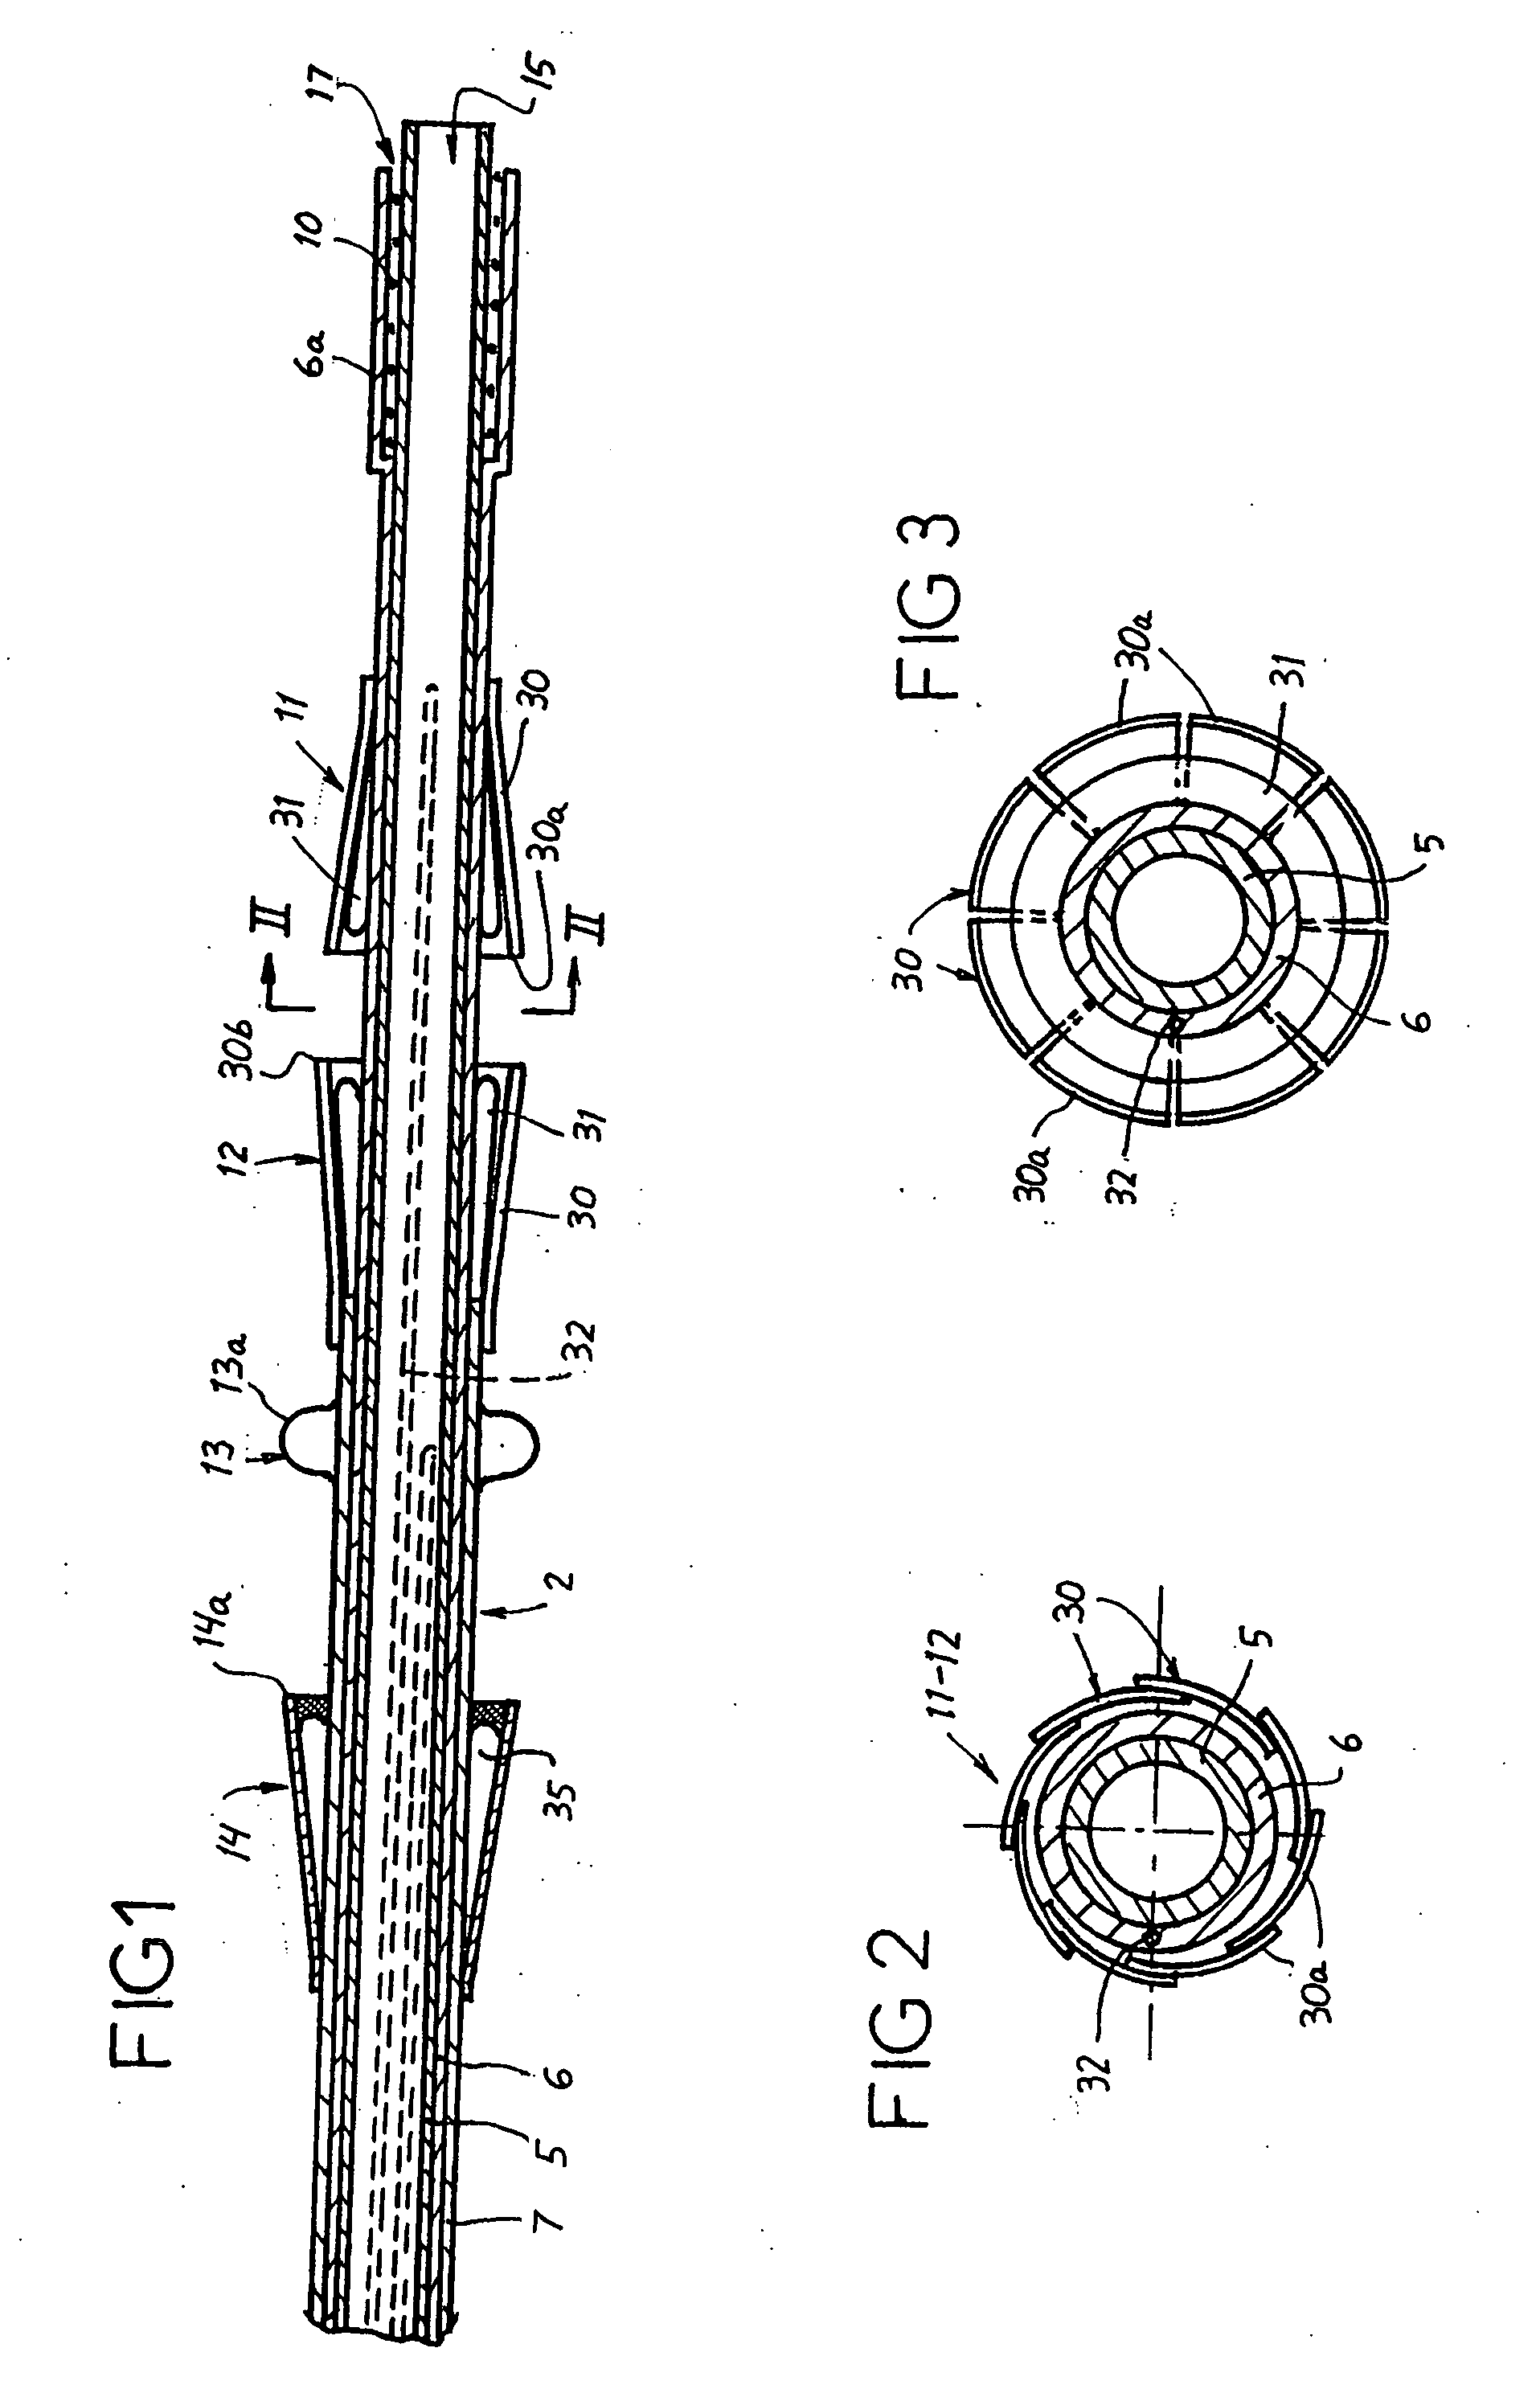 Prosthetic valve for transluminal delivery